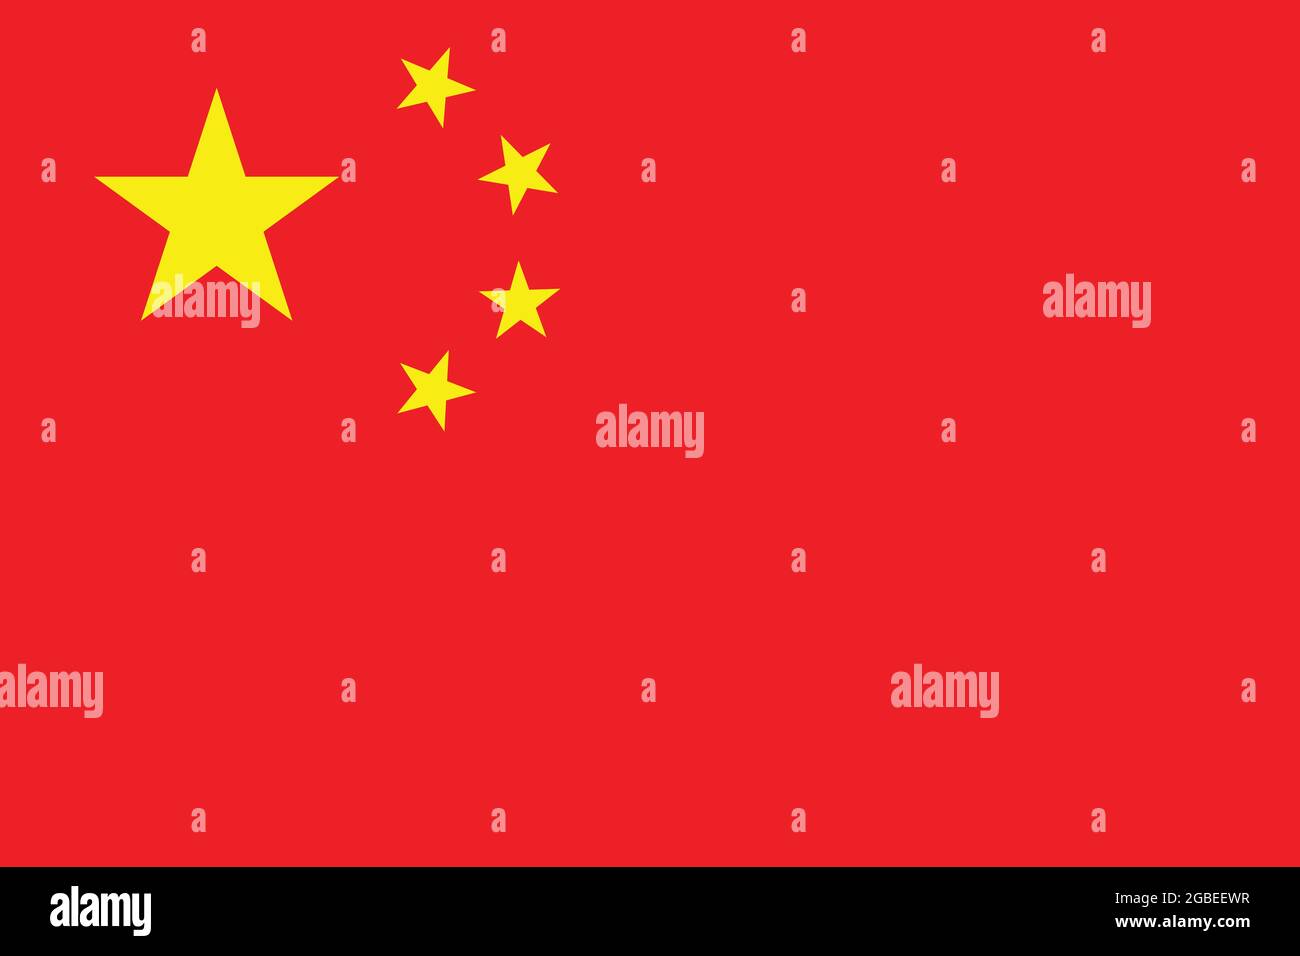 Flag of China original size and colors vector illustration, National Flag of the People's Republic of China, Five-starred Red Flag, Chinese Communist Stock Vector